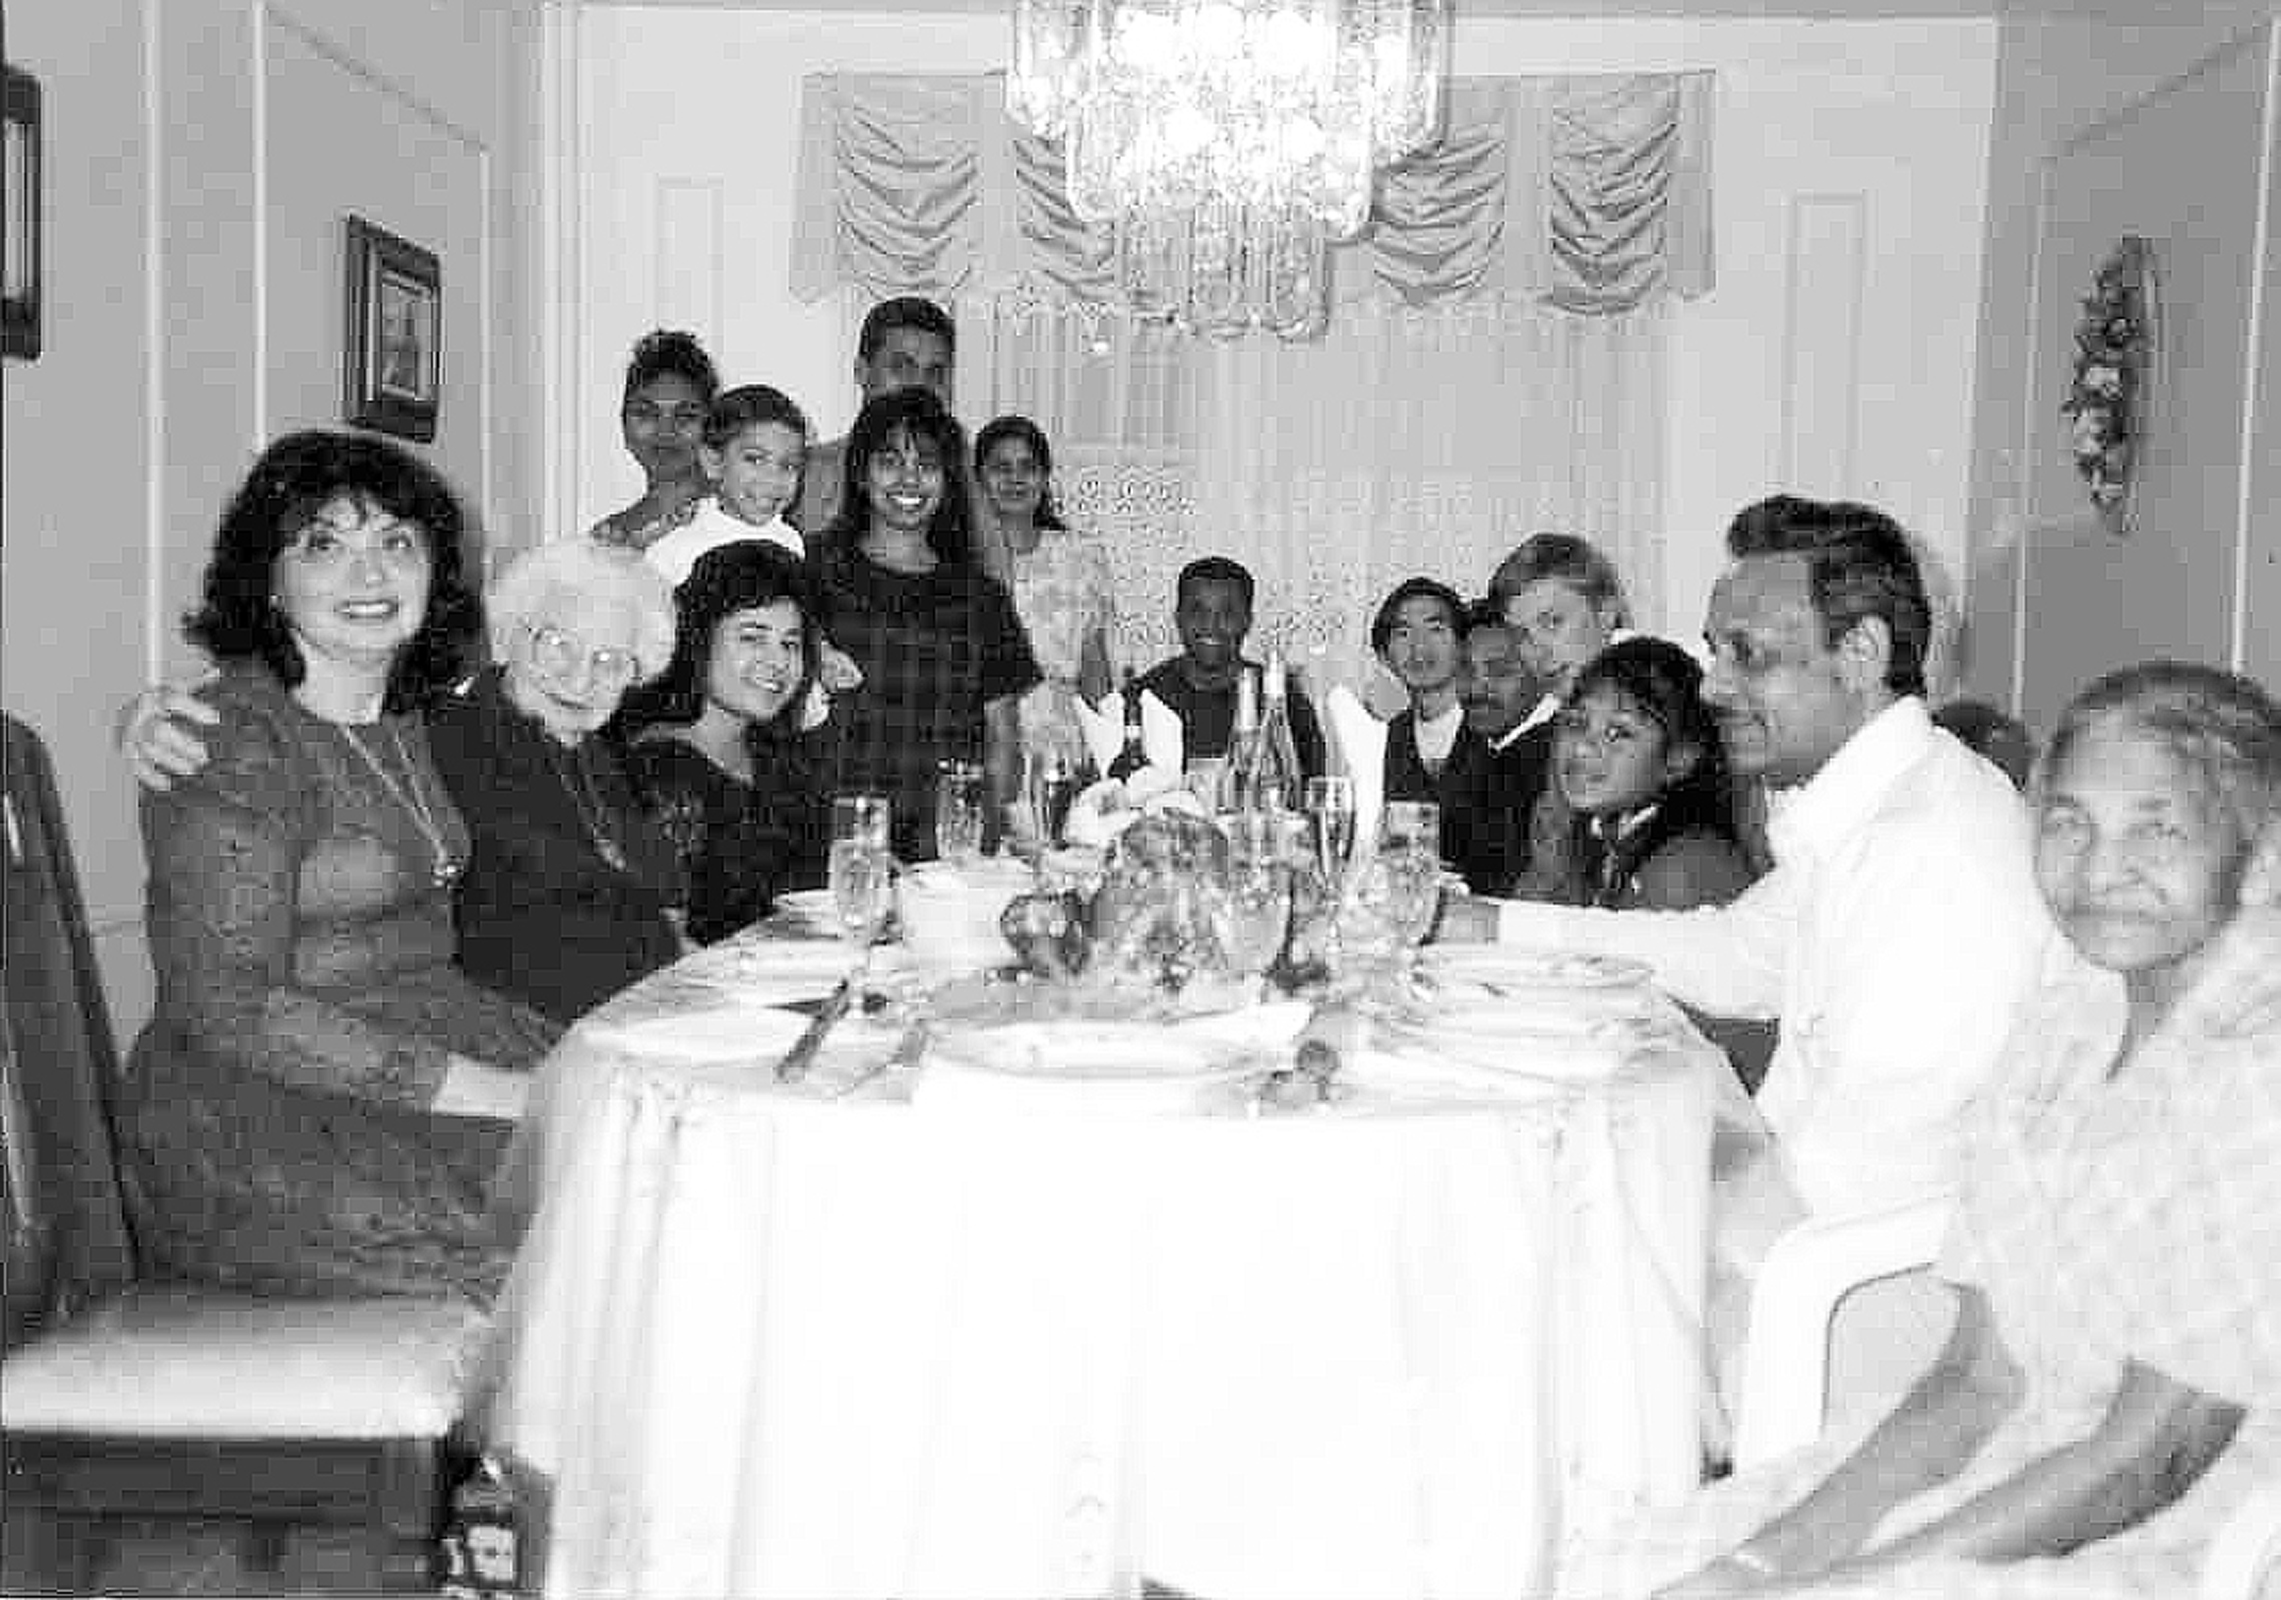 Inge Auerbacher and her mother with Indian neighbors on Thanksgiving Day 1995.